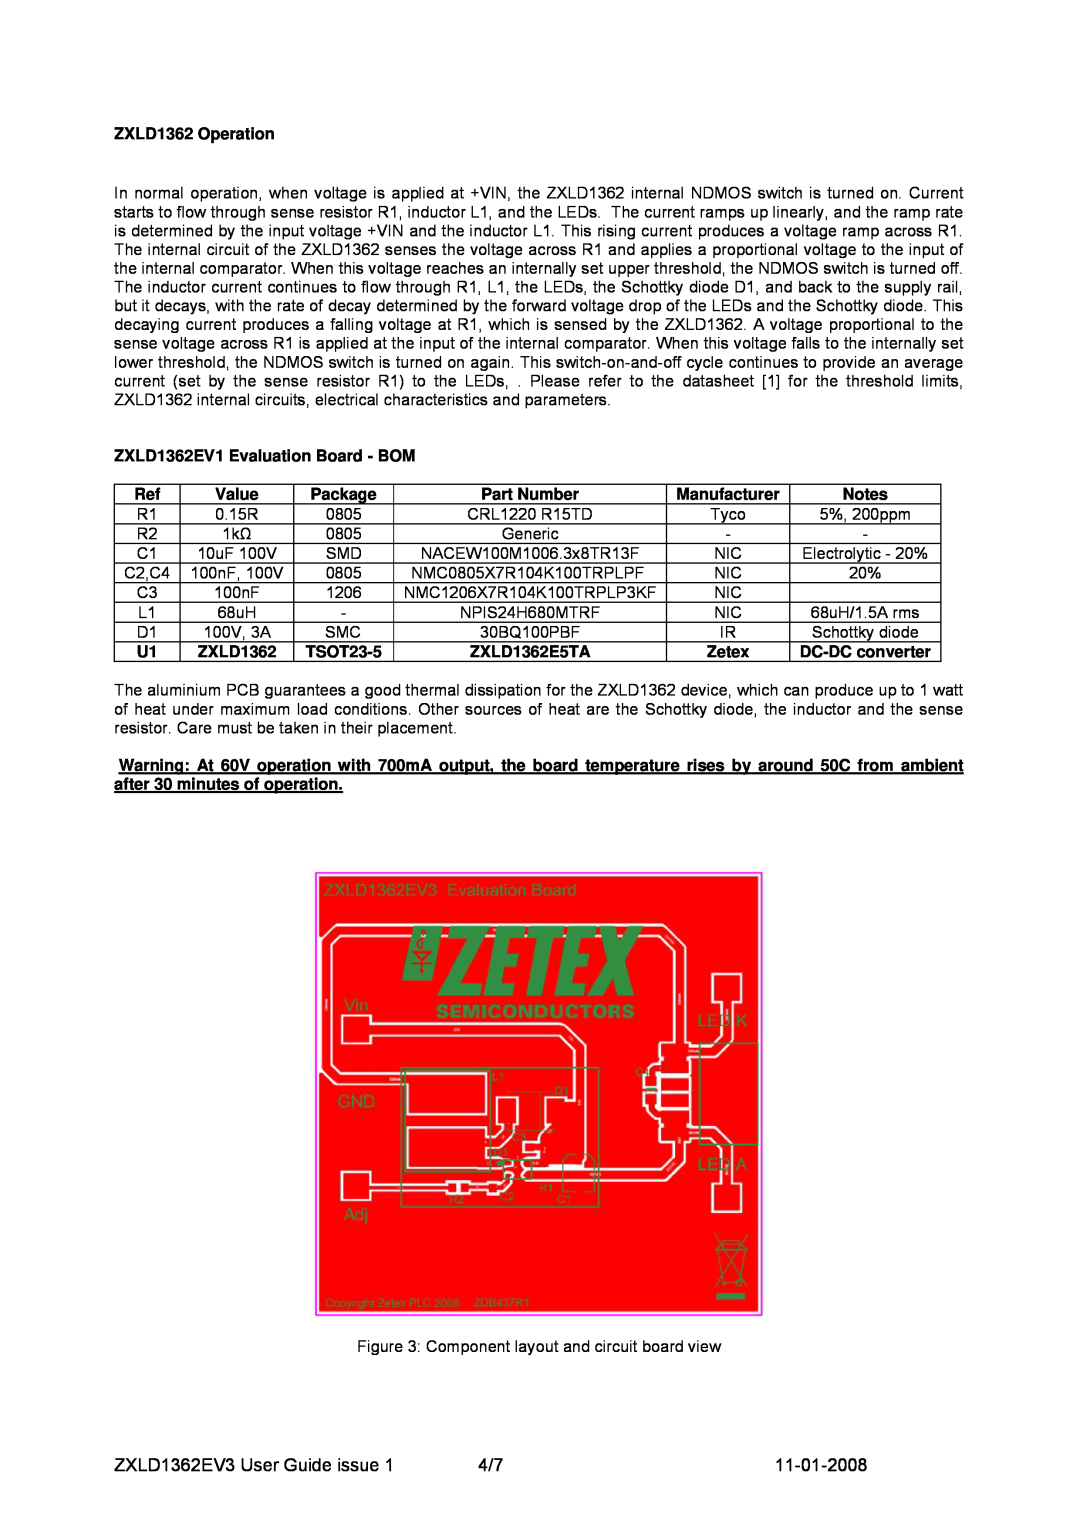 Zetex Semiconductors PLC manual ZXLD1362EV3 User Guide issue, 11-01-2008, Tyco 